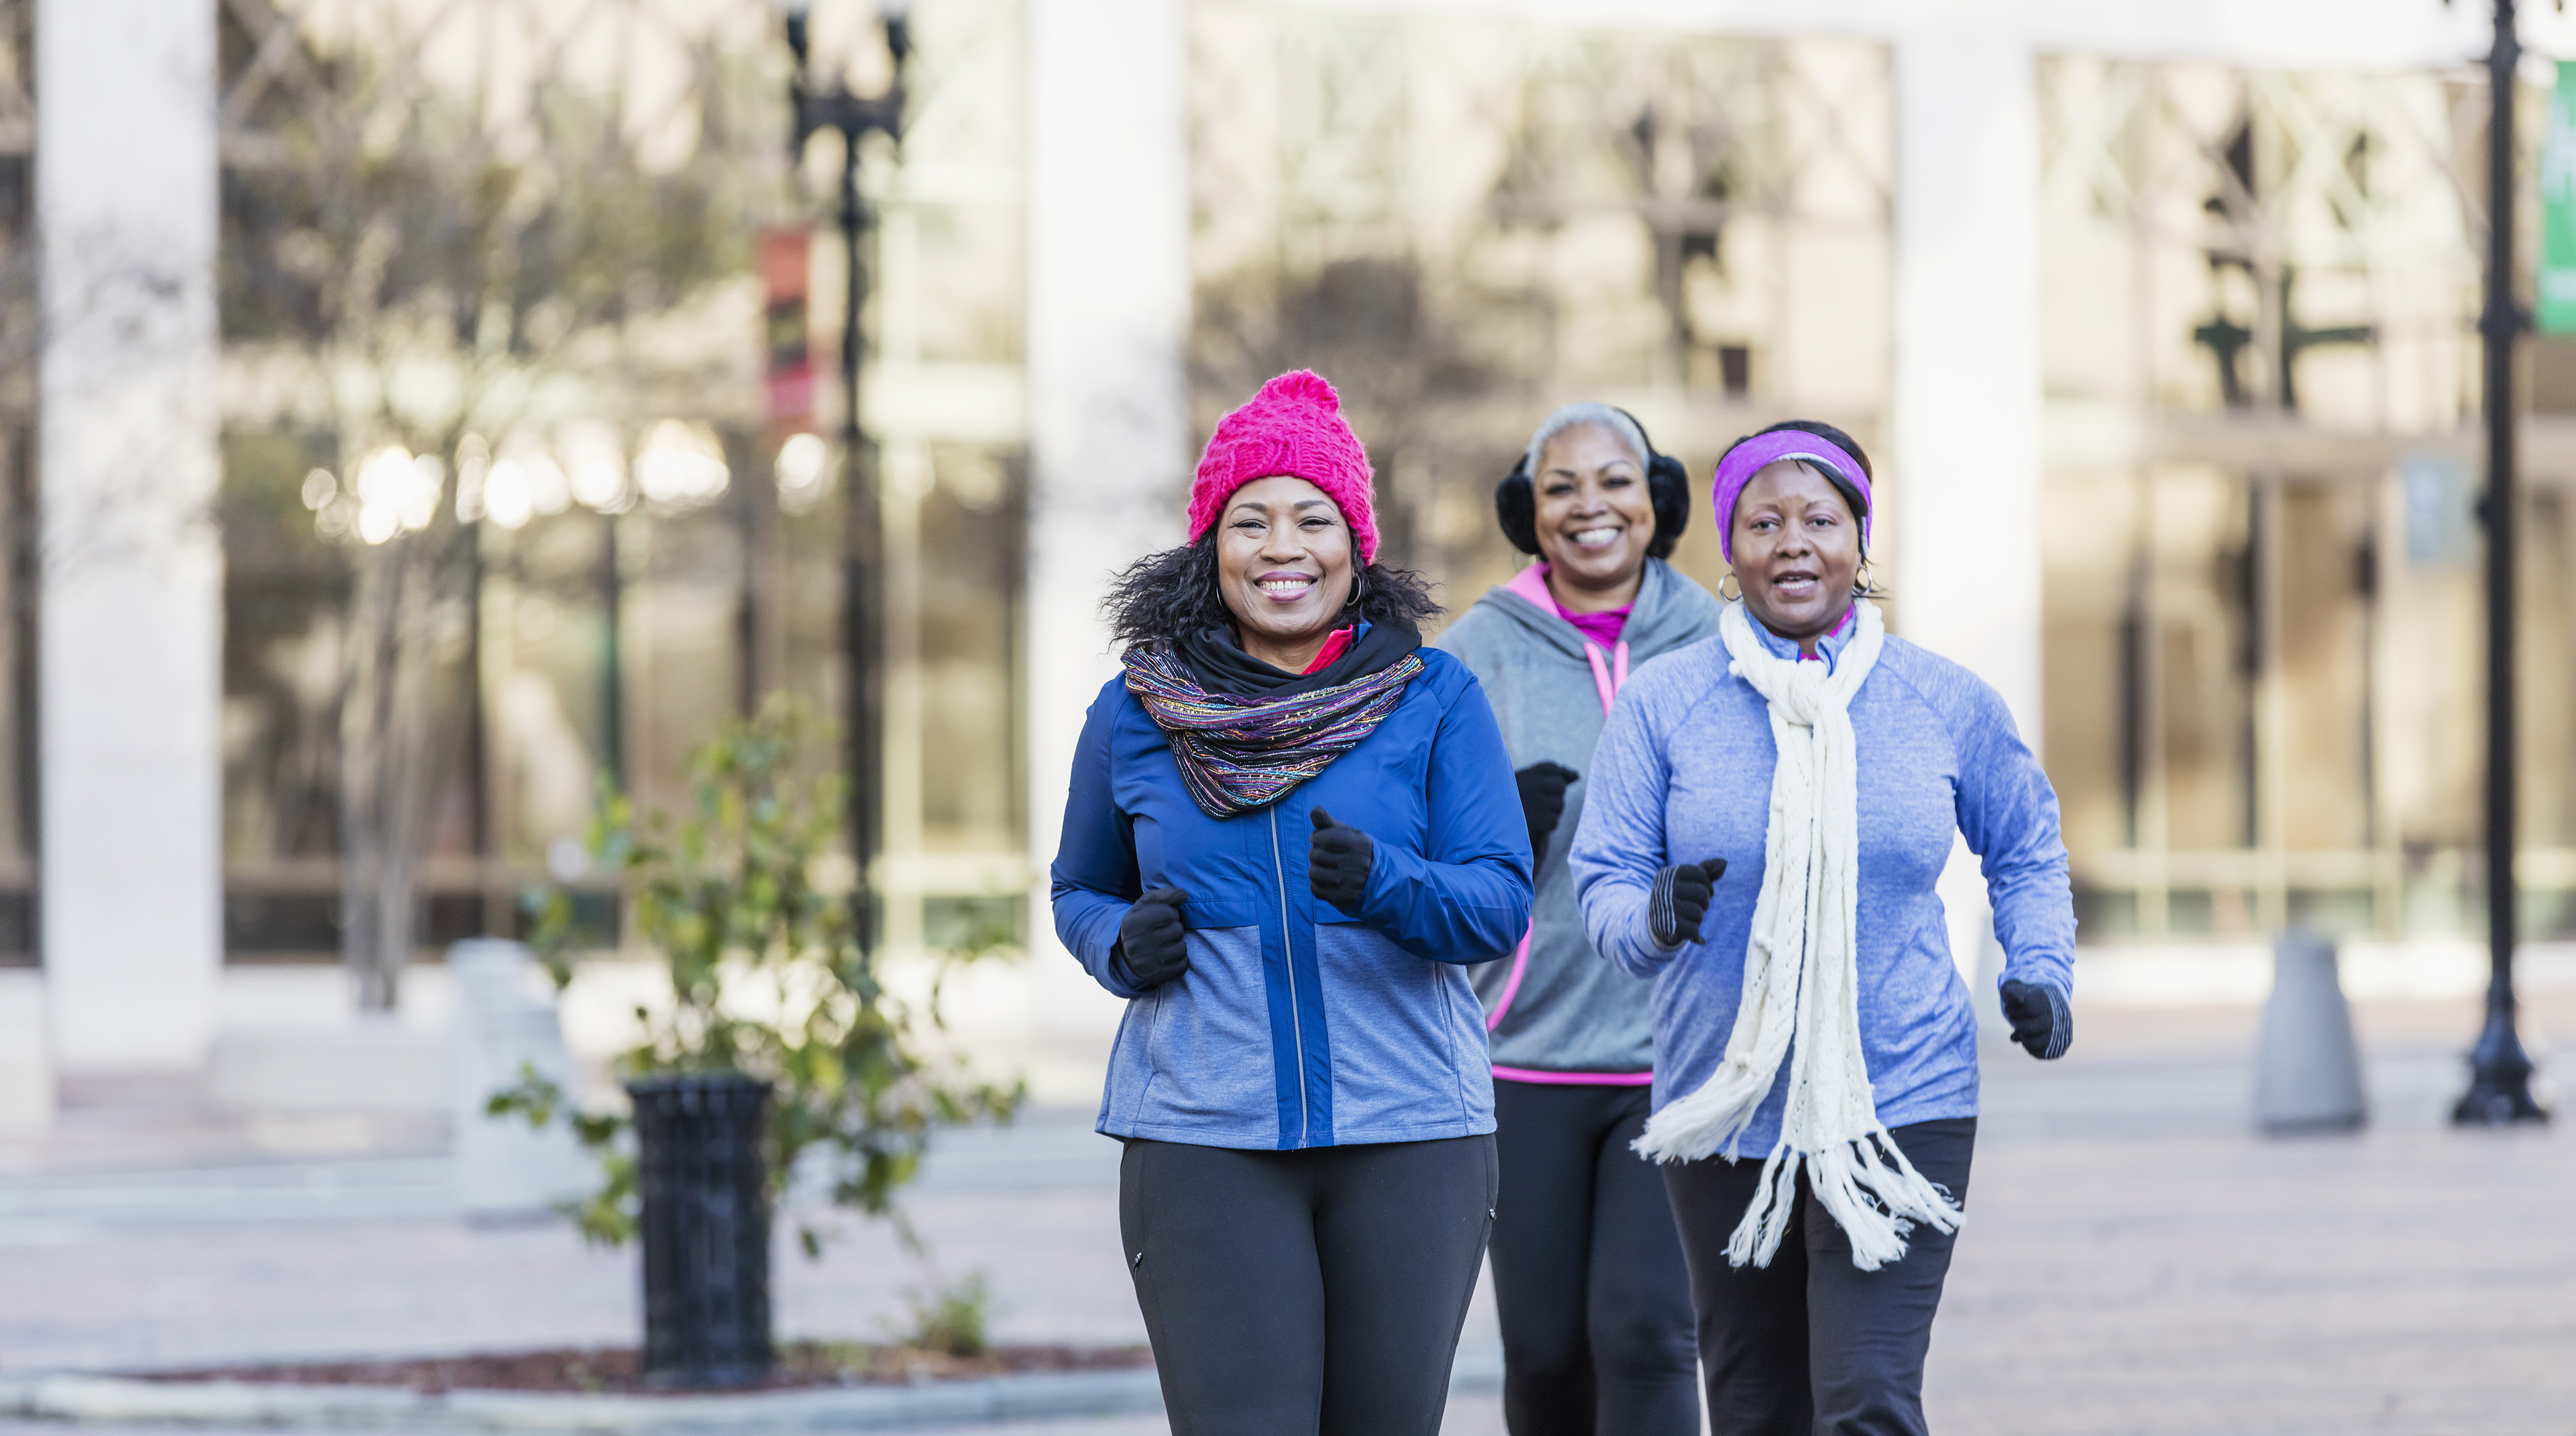 Three women walking in cold weather